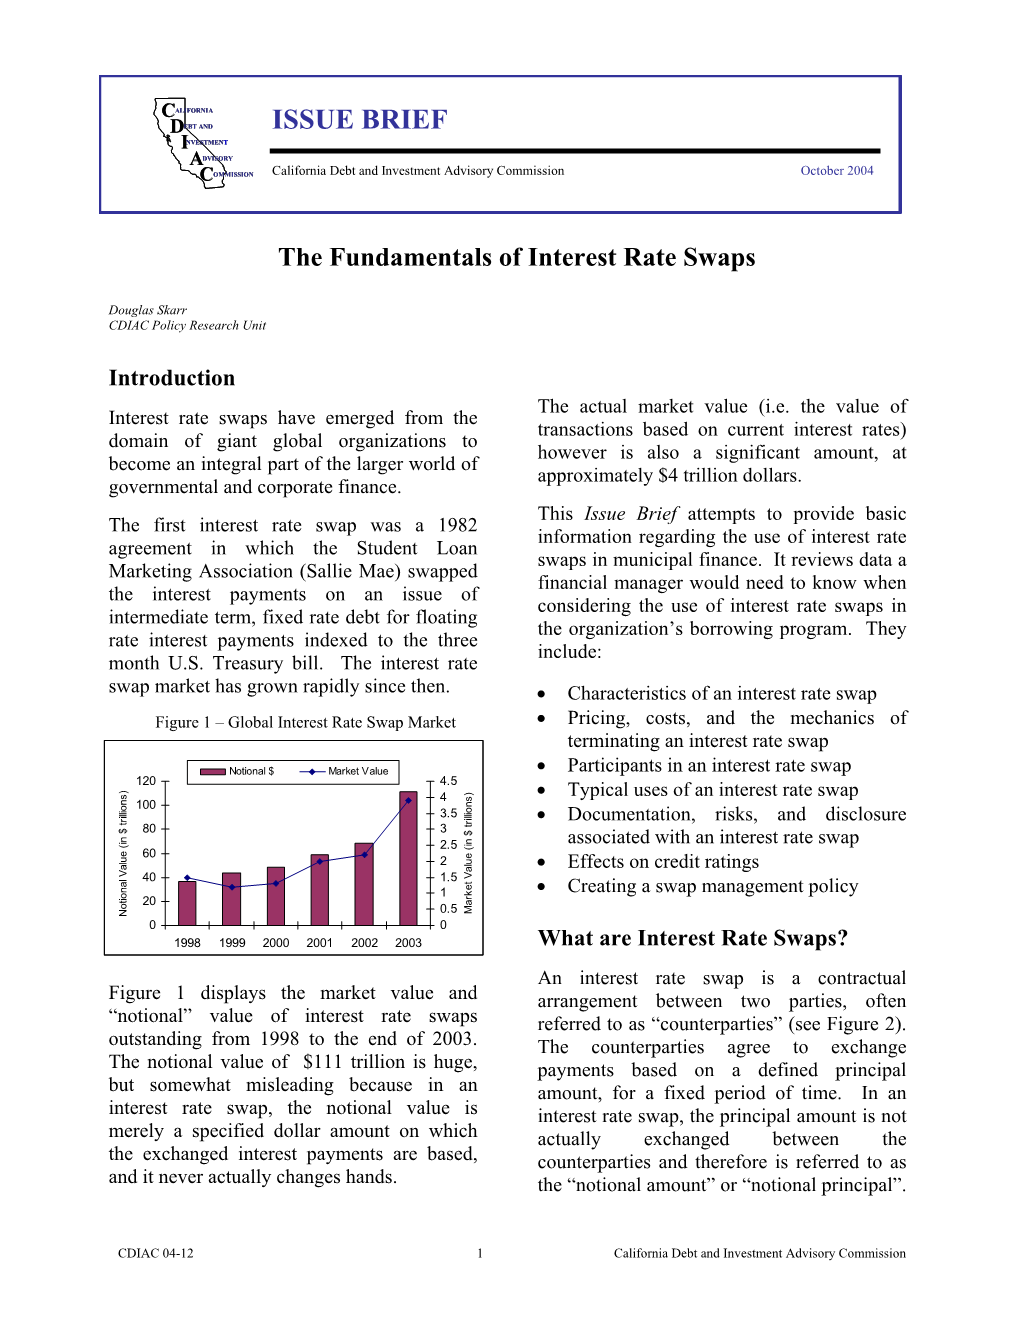 The Fundamentals of Interest Rate Swaps Issue Brief